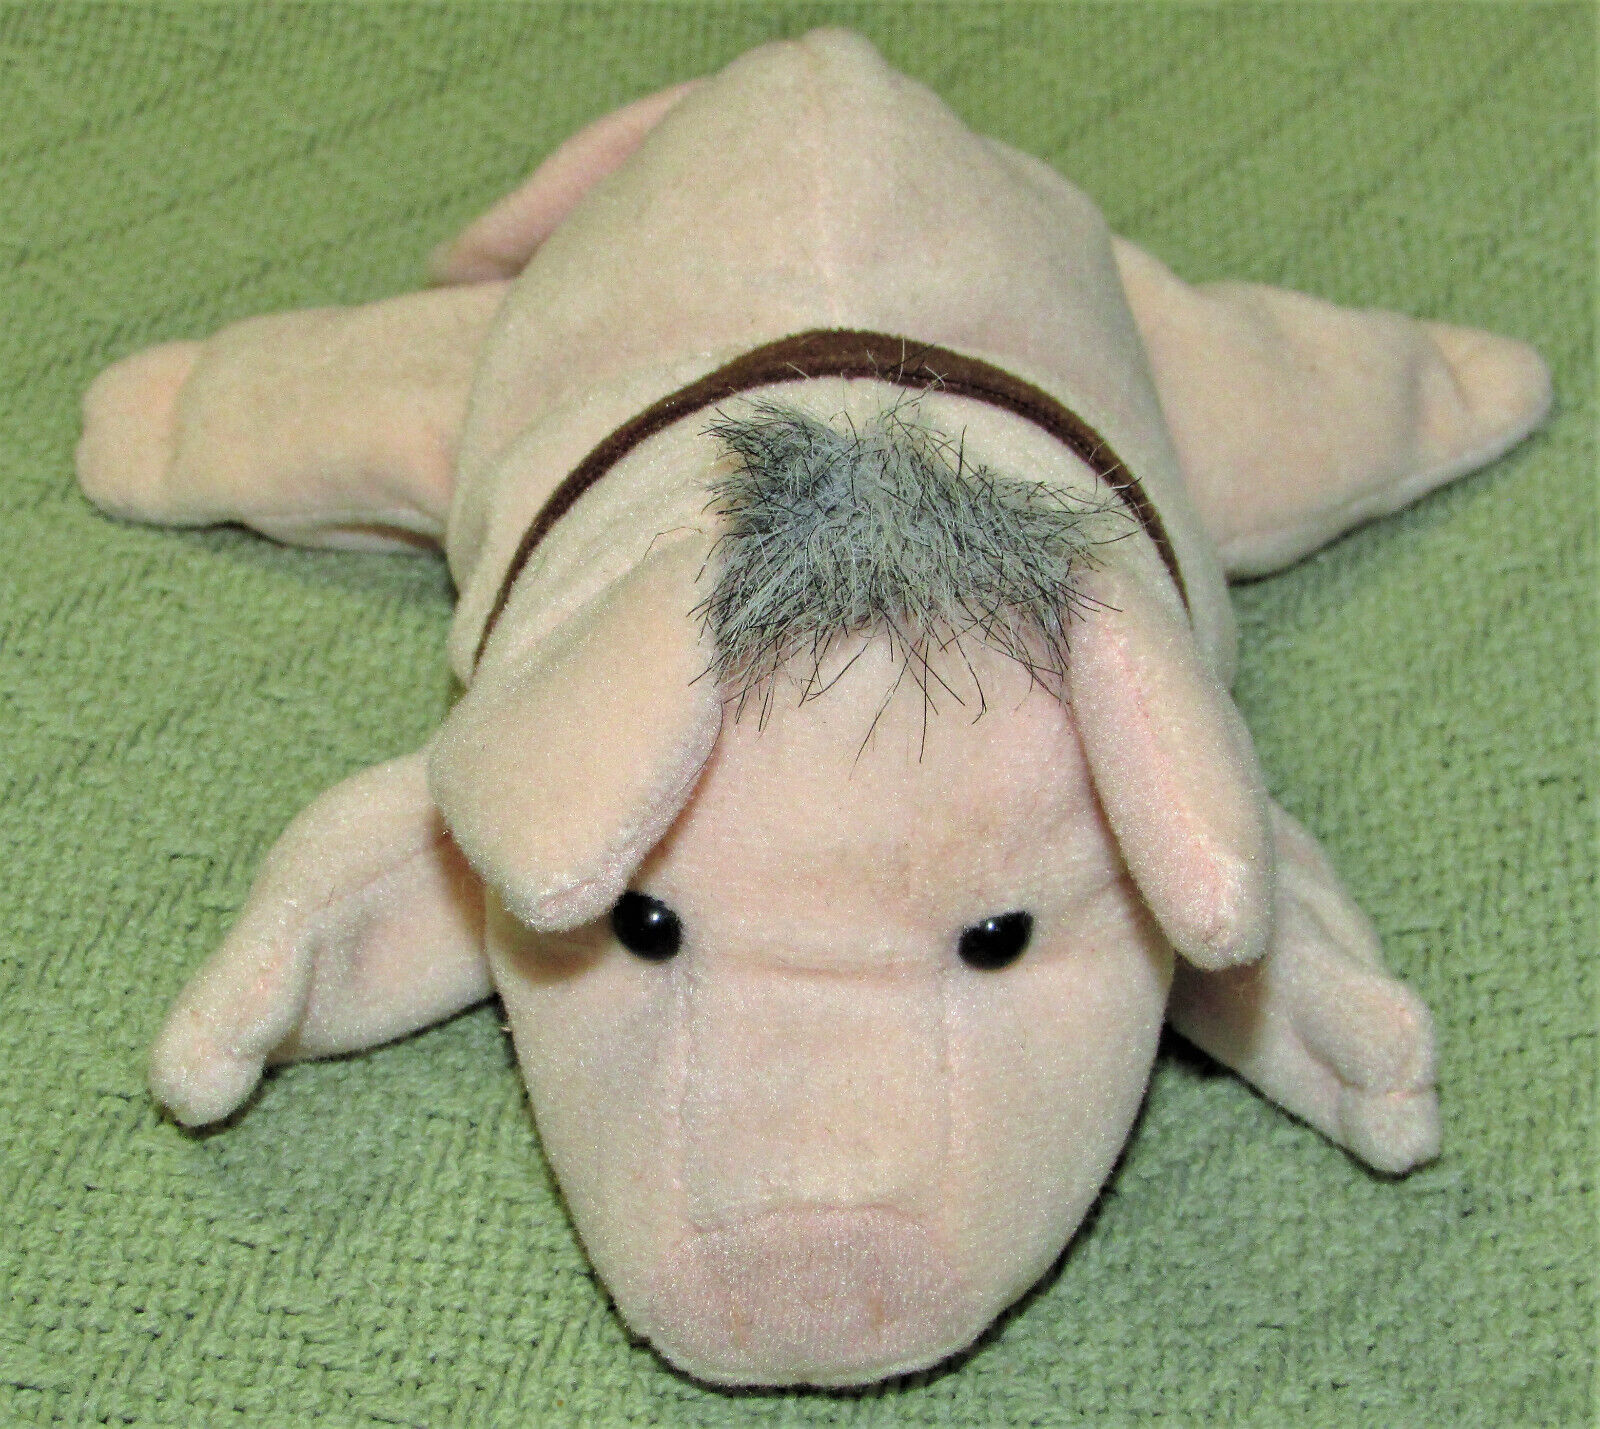 BABE AND FRIENDS BEAN BAG PIG 7" EQUITY TOYS COLLAR NAME TAG STUFFED ANIMAL TOY - $7.20